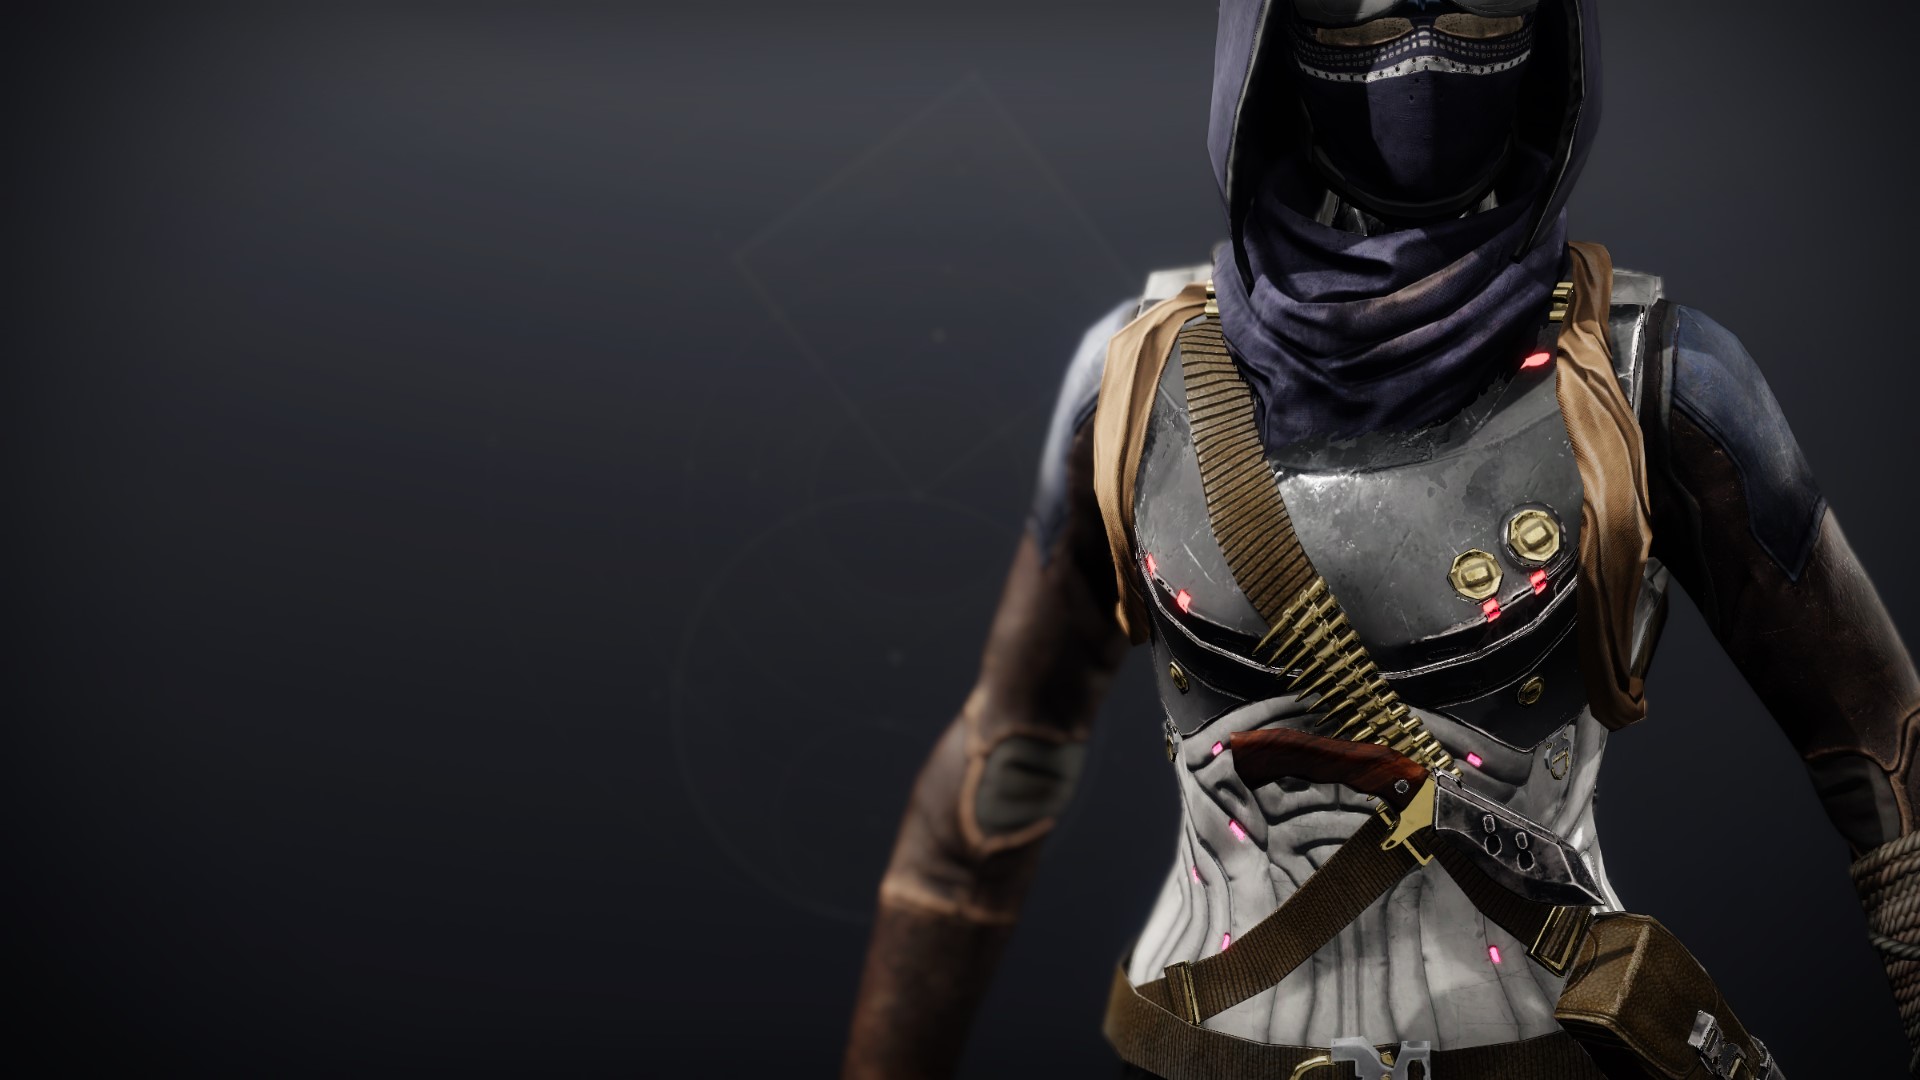 An in-game render of the Wild Hunt Vest.